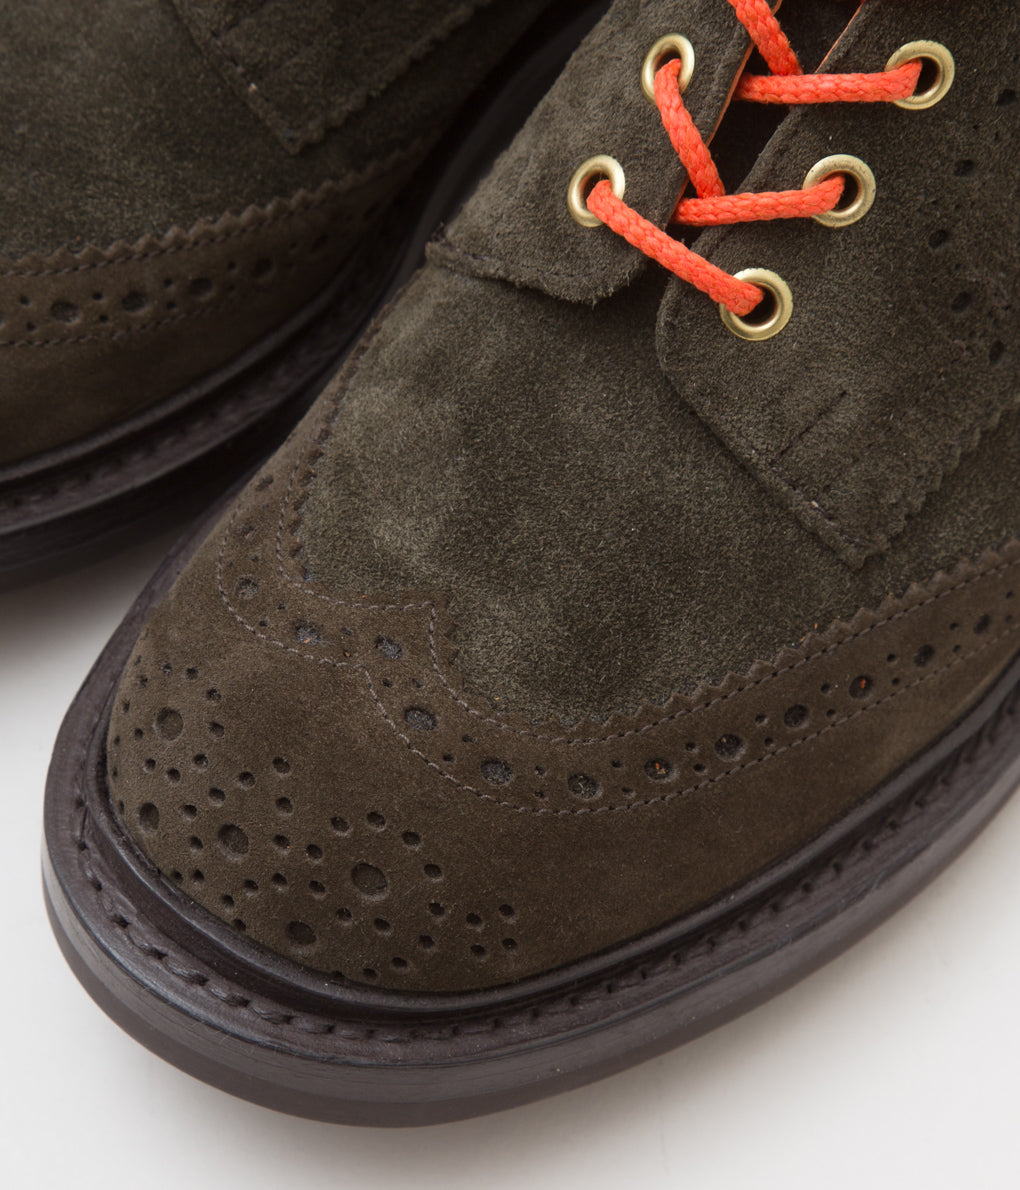 QUILP BY TRICKER'S×MAIDENS SHOP "M7495 BROGUE BOOTS" (DK OLIVE MULTI)